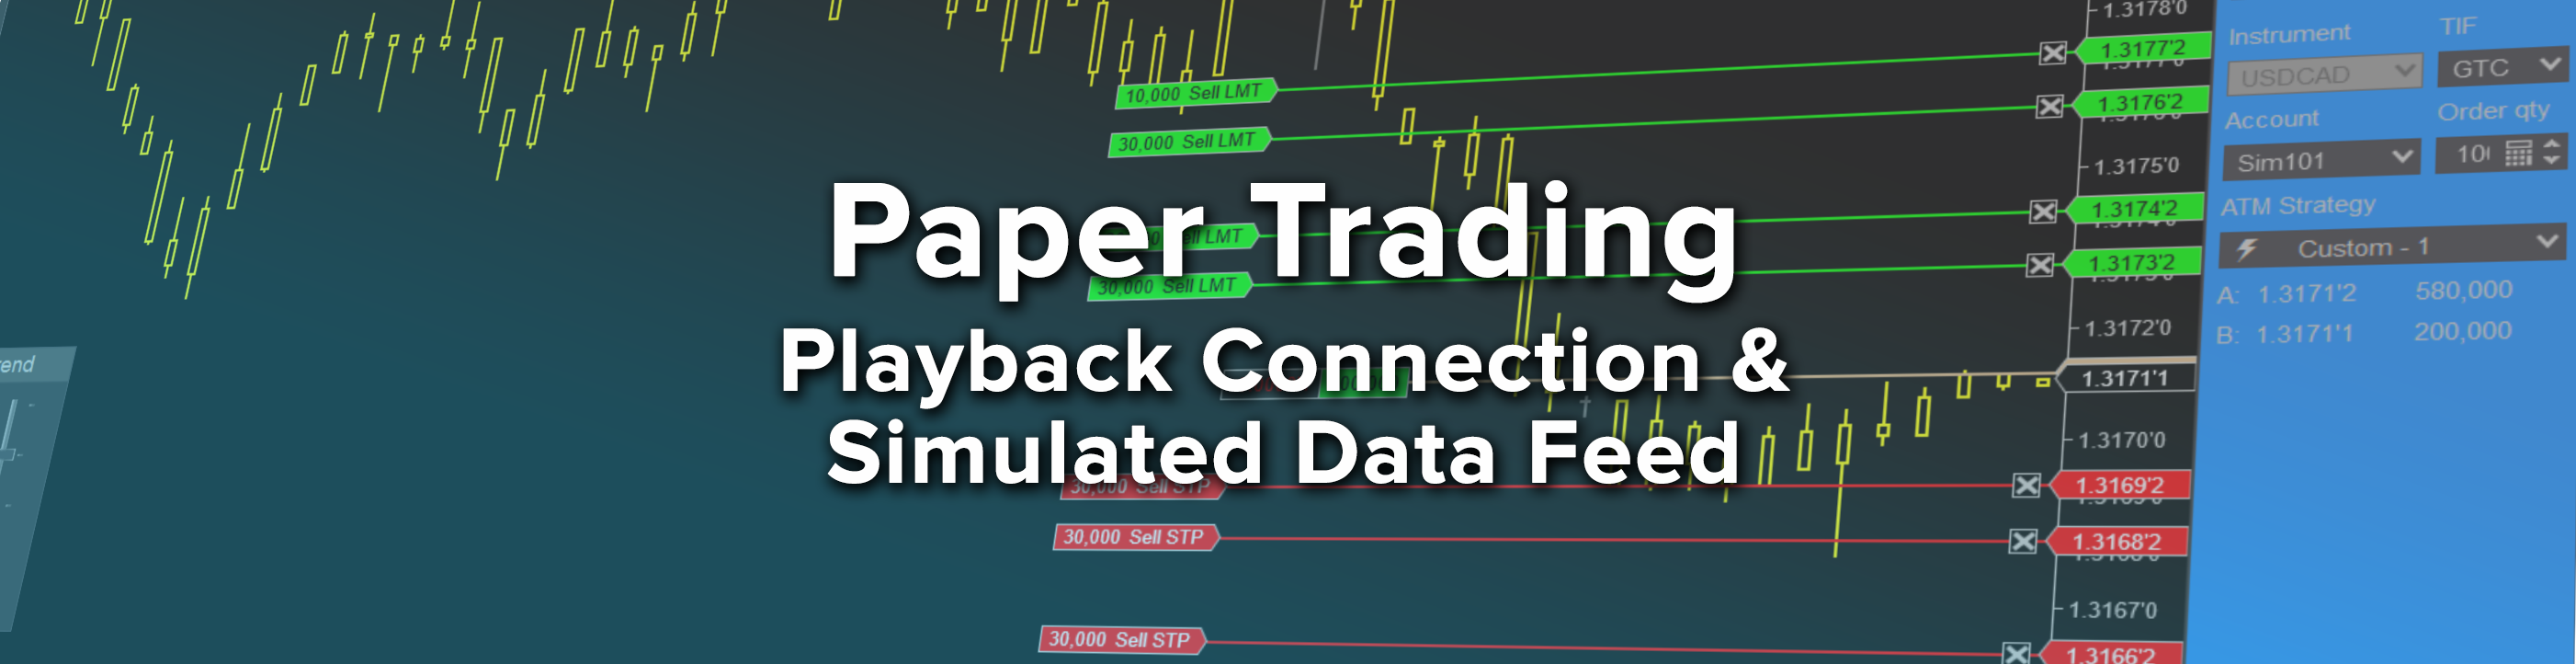 Paper trading